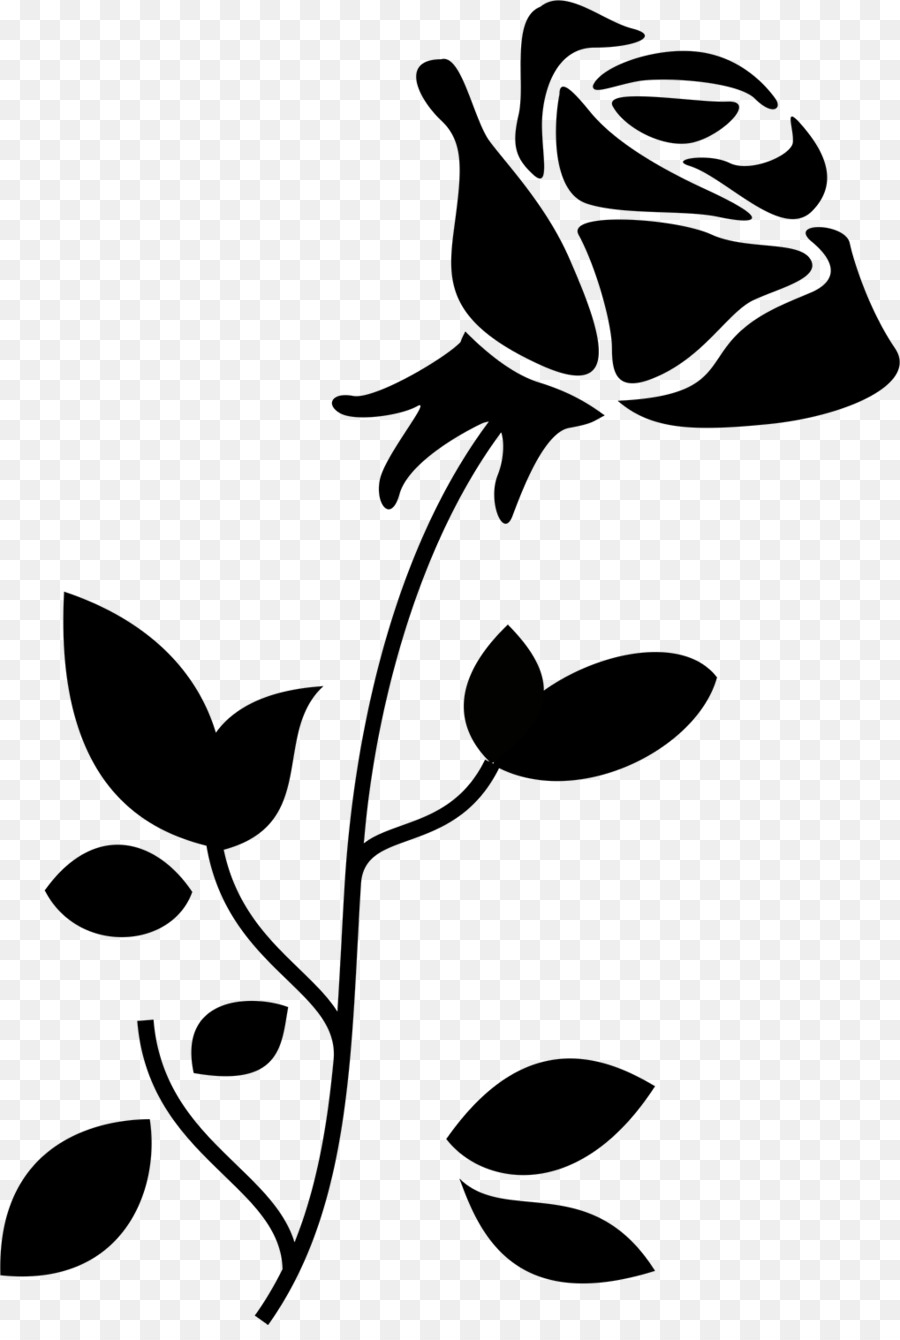 Flower bouquet Rose Paper Embroidery - rose vector png download - 1019*1500 - Free Transparent Flower png Download.